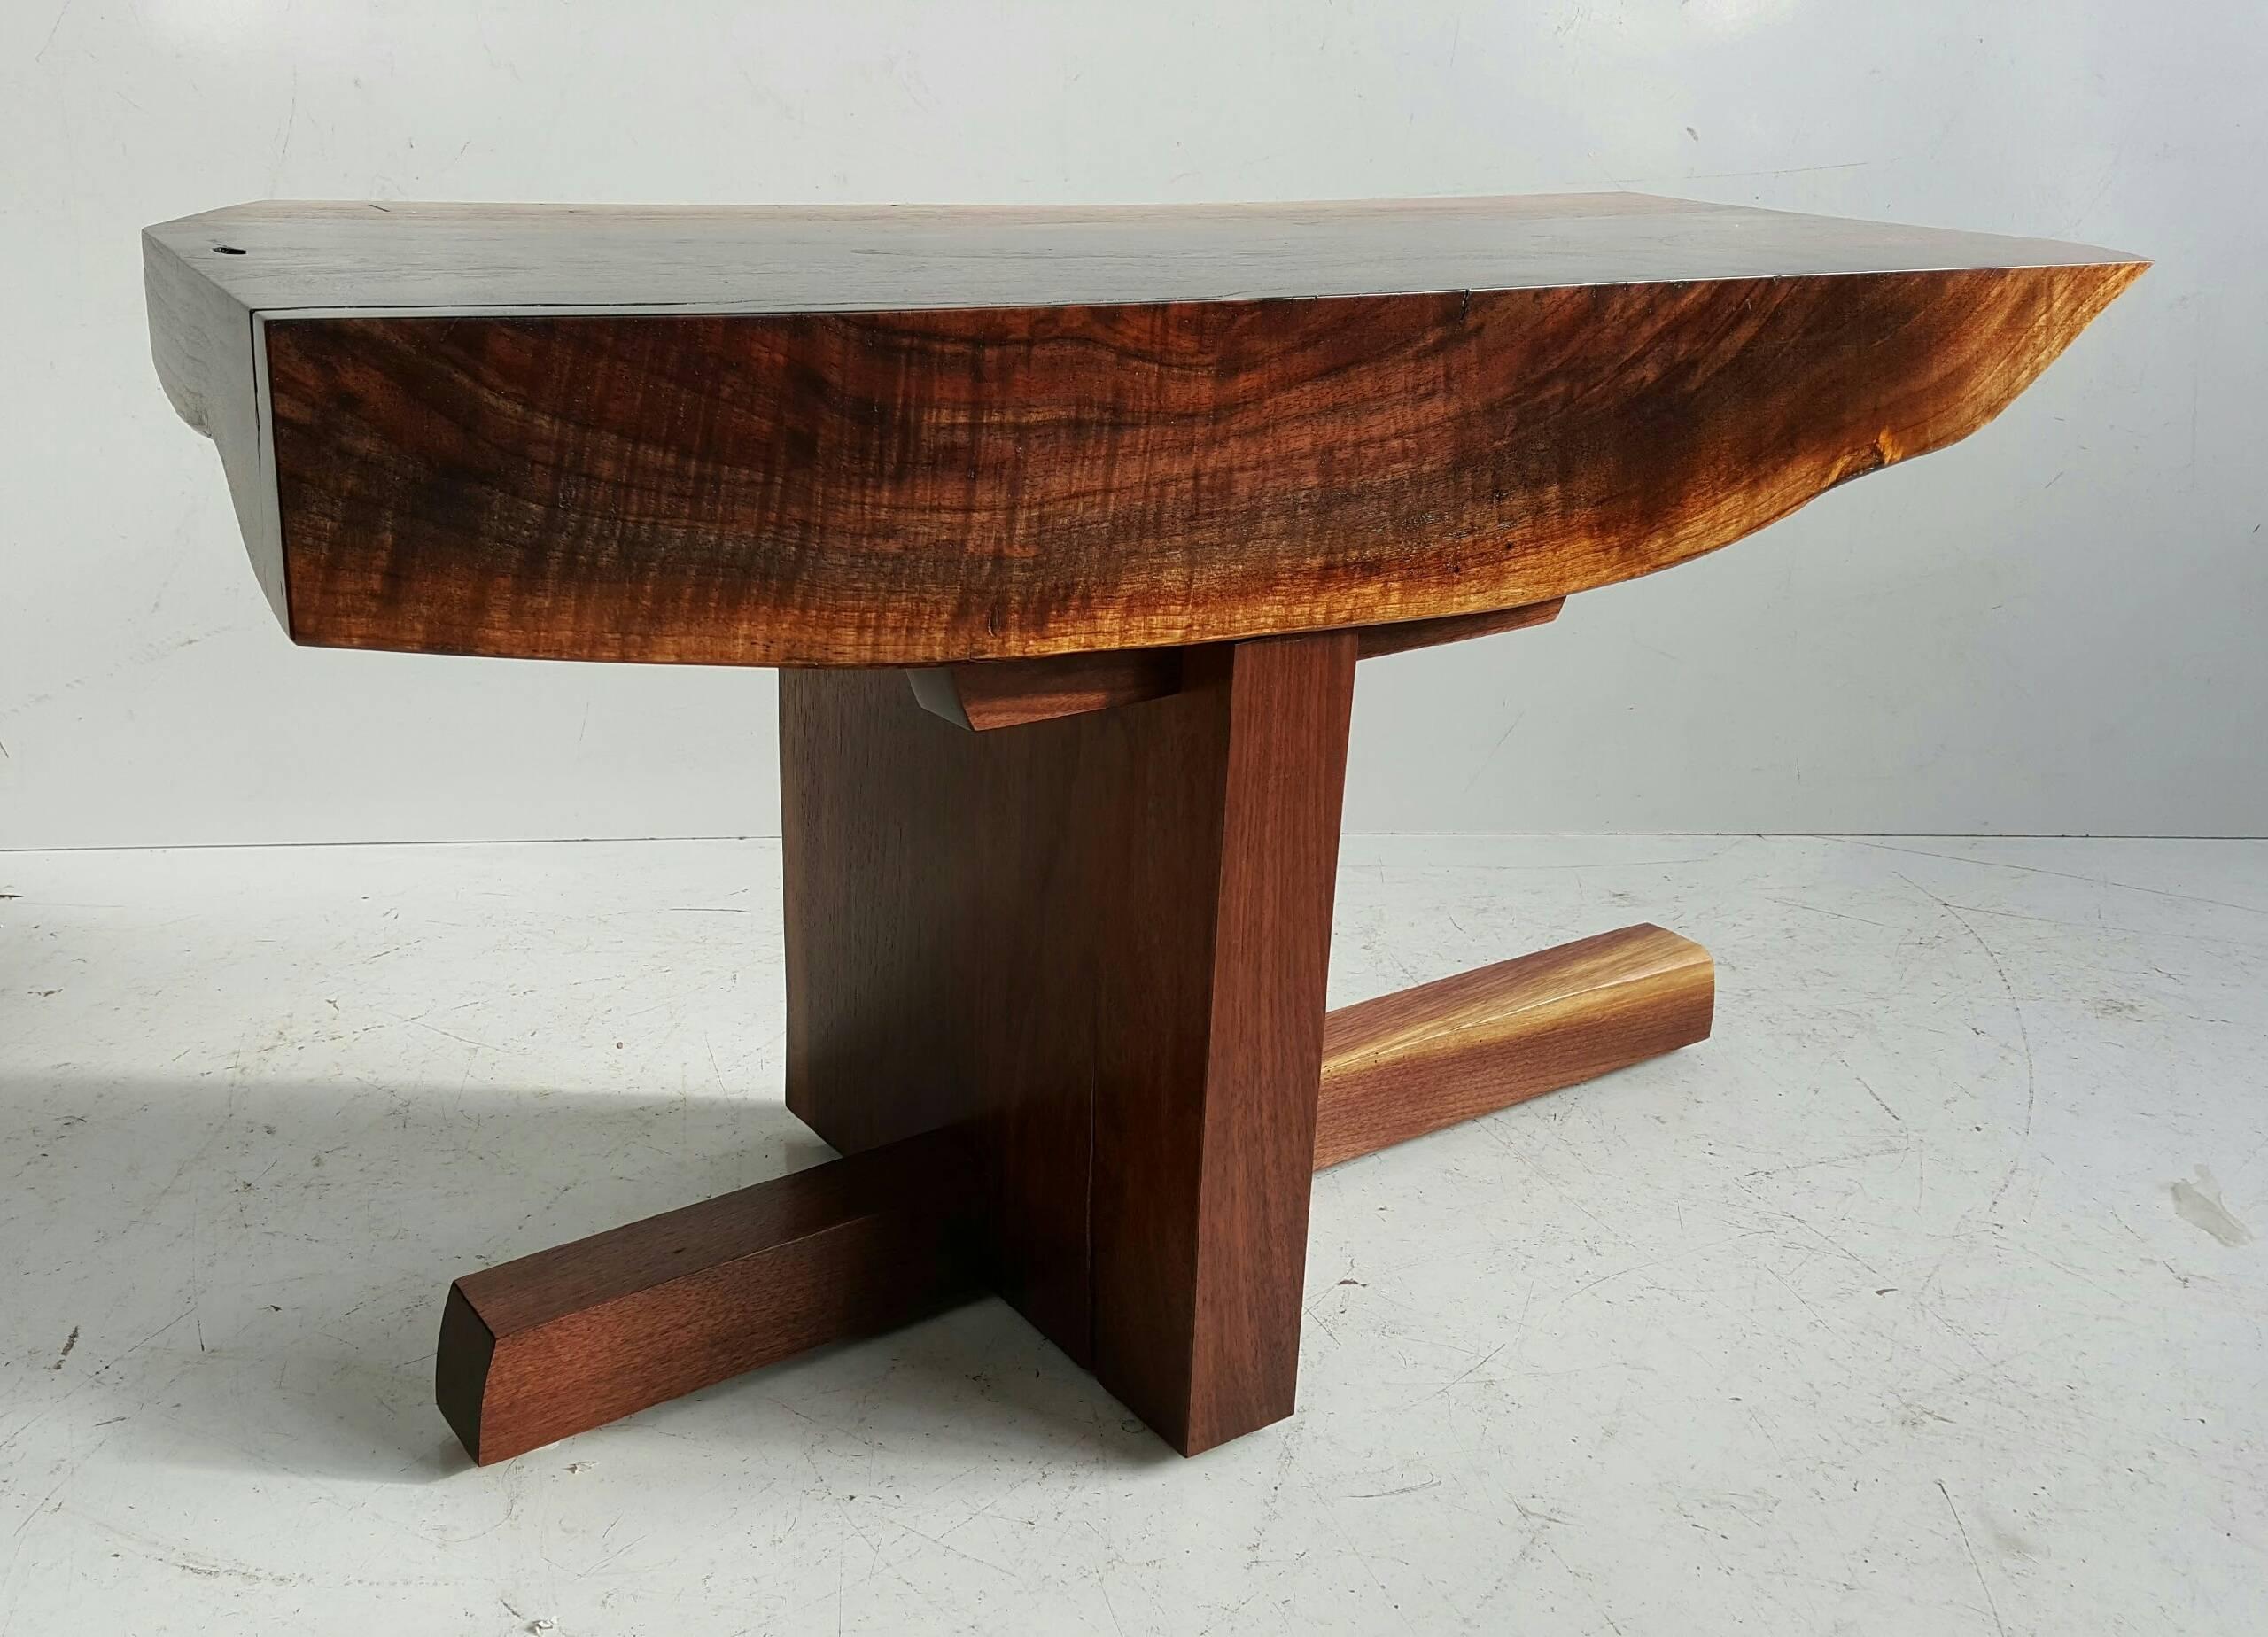 Modernist Free-Edge Bench or table,,Figured Walnut,  handcrafted by Griff Logan .. Style of George Nakashima,, Stunning ..